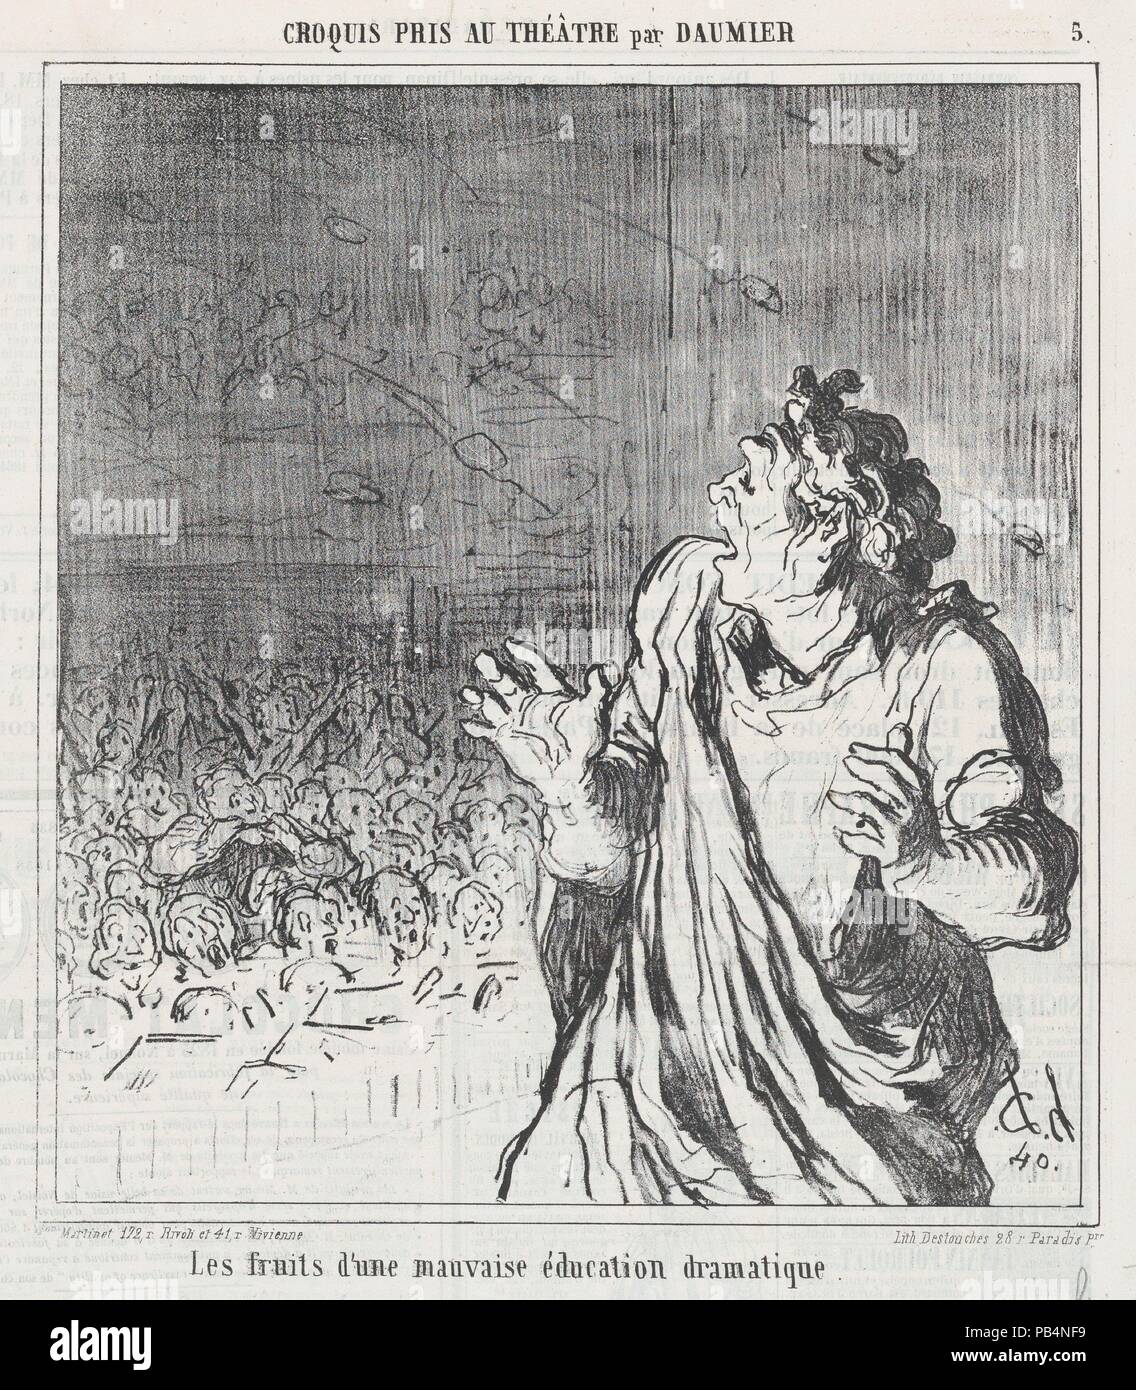 The results of bad dramatic timing, from 'Theater sketches,' published in Le Charivari, 1864. Artist: Honoré Daumier (French, Marseilles 1808-1879 Valmondois). Dimensions: Image: 9 5/16 × 8 1/2 in. (23.7 × 21.6 cm)  Sheet: 11 9/16 × 11 13/16 in. (29.3 × 30 cm). Printer: Destouches (Paris). Publisher: Aaron Martinet (French, 1762-1841). Series/Portfolio: 'Theater sketches' (Croquis pris au théatre). Date: 1864. Museum: Metropolitan Museum of Art, New York, USA. Stock Photo